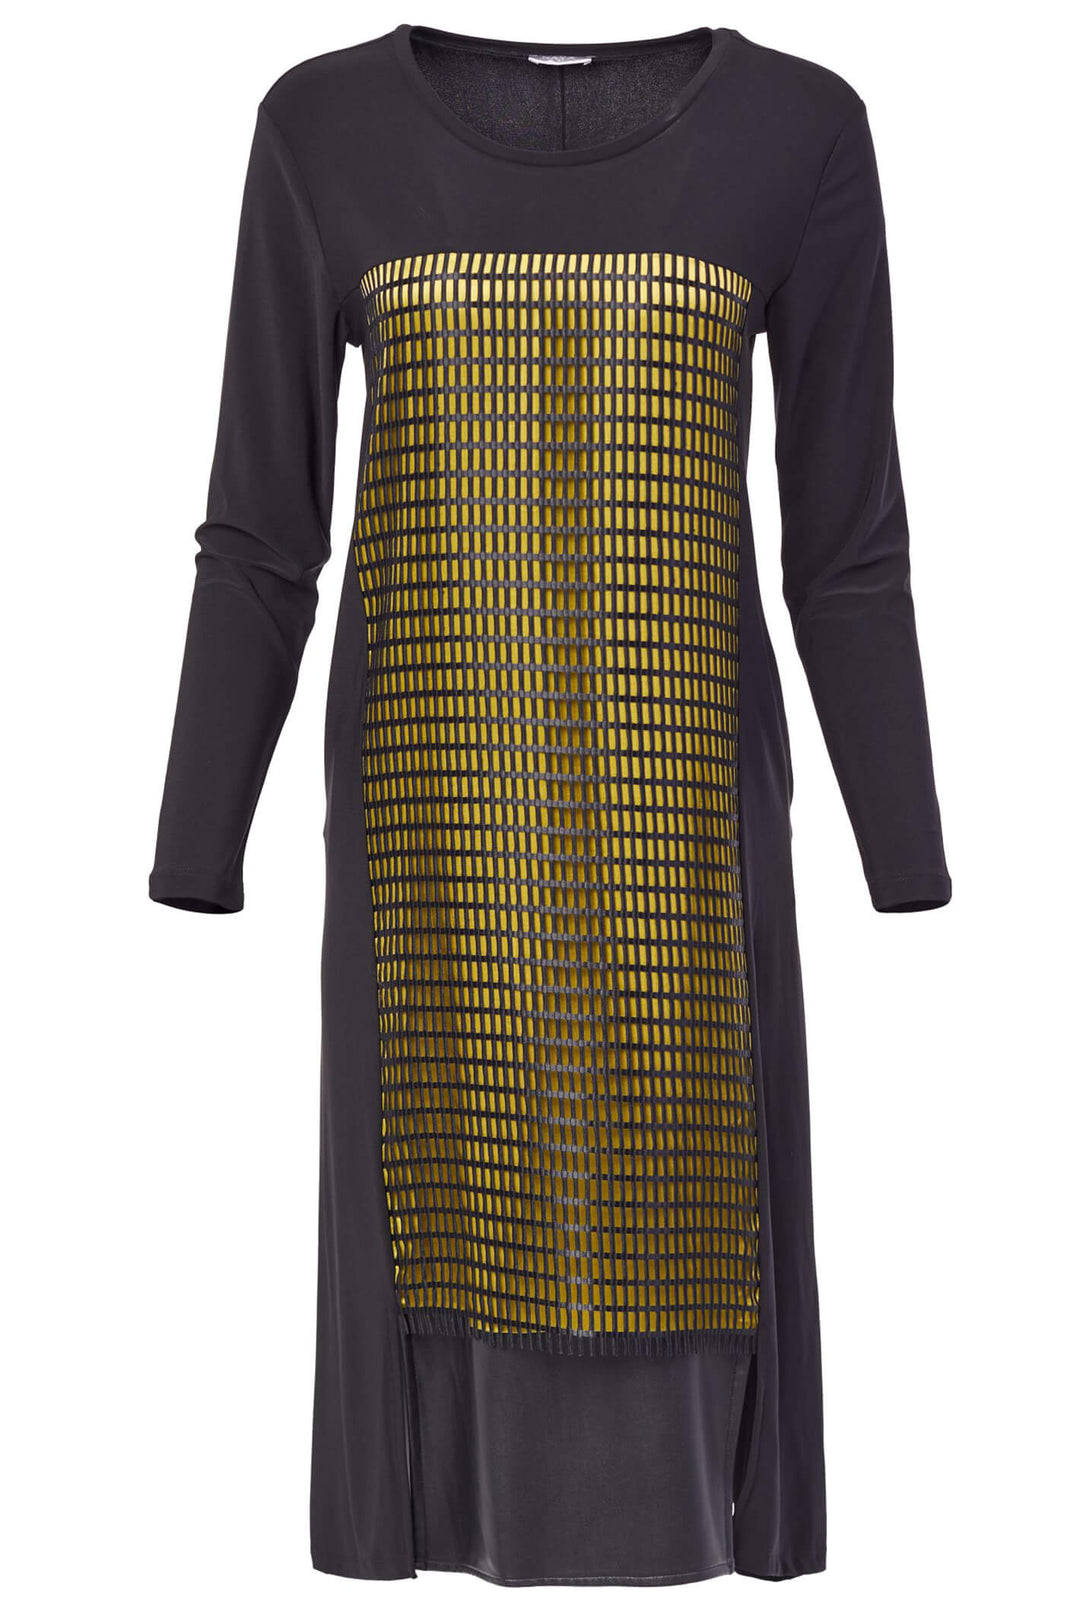 Naya NAW23 112 Black Yellow Mesh Front Jersey Dress With Sleeves - Experience Boutique